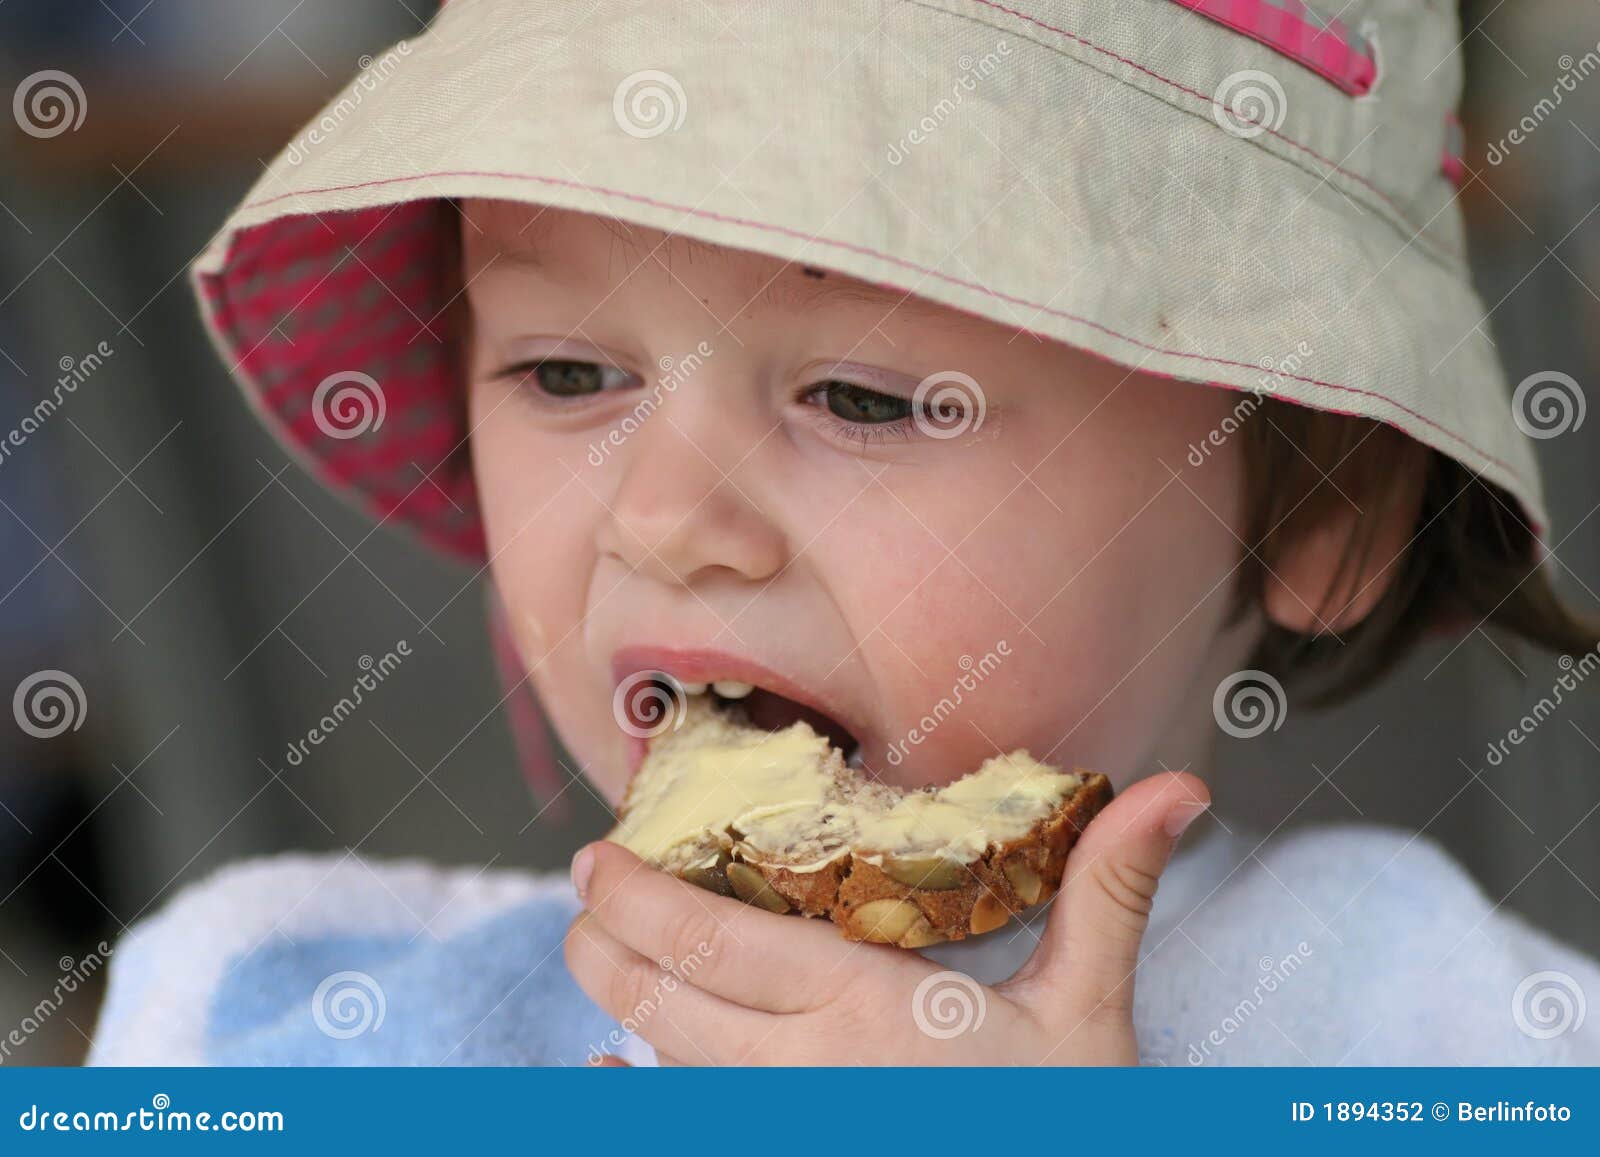 child eating a bread